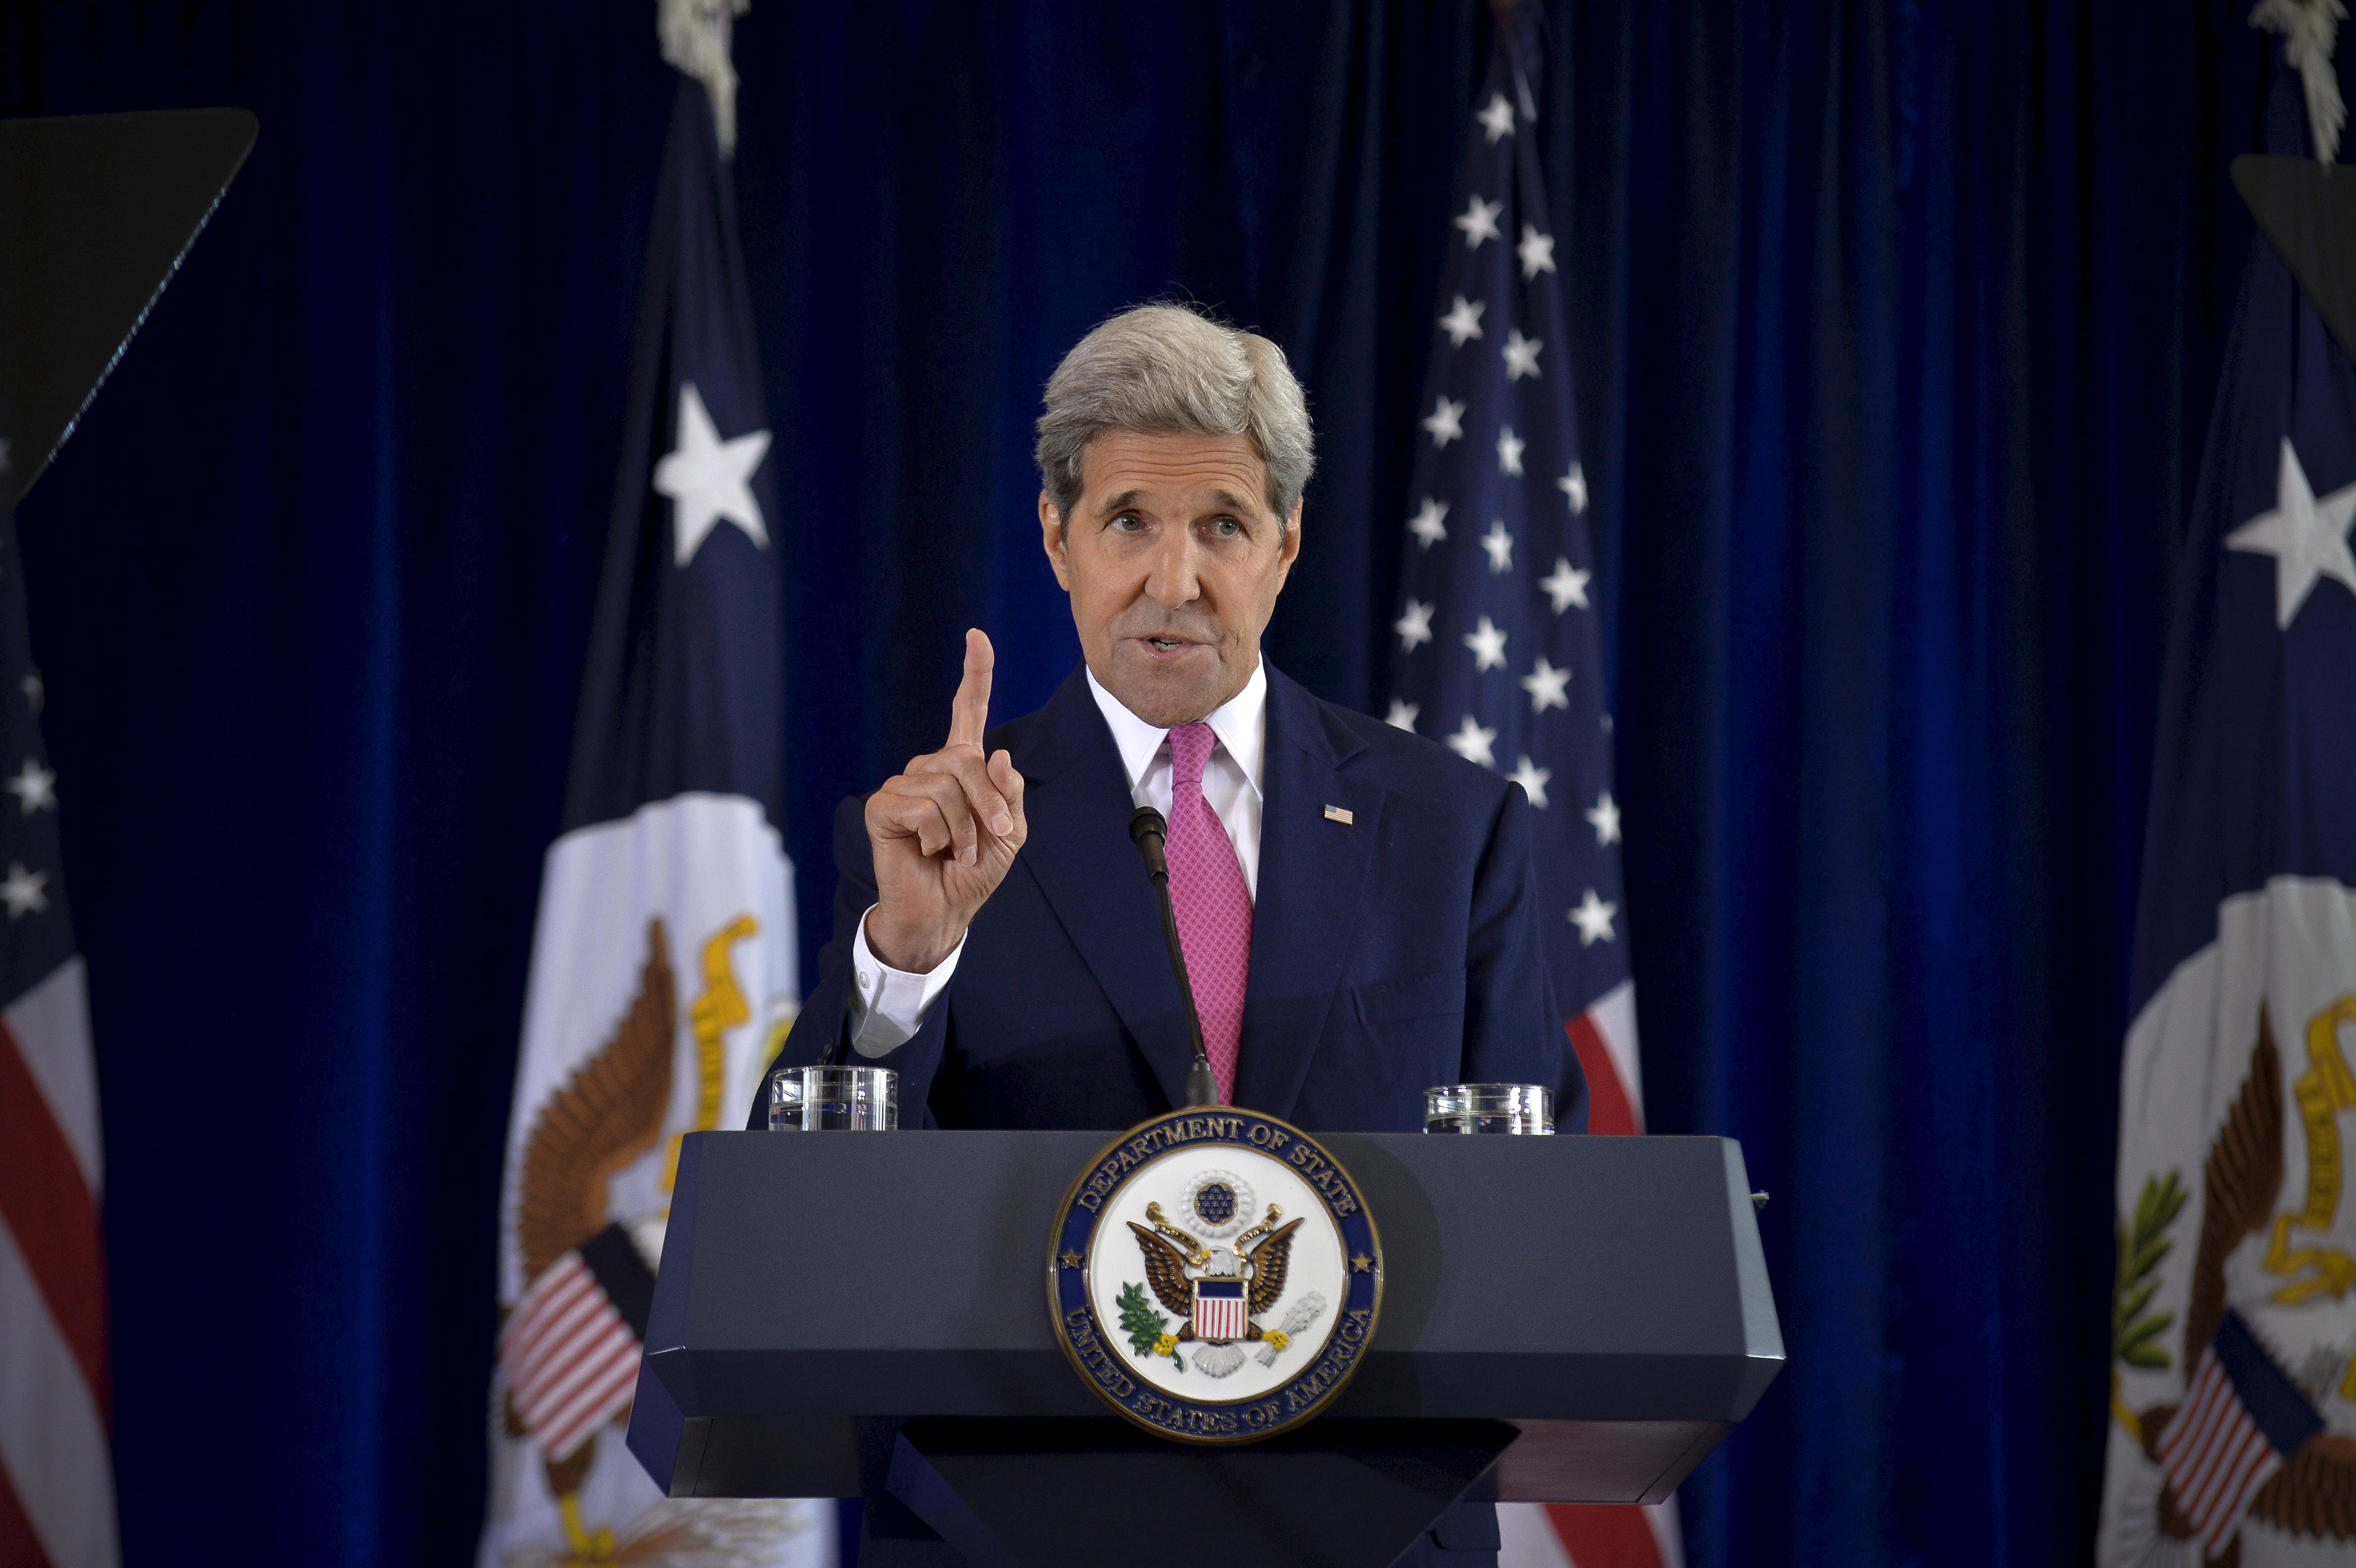 U.S. Secretary of State John Kerry delivers a speech on the nuclear agreement with Iran, in Philadelphia on Sept. 2, 2015. (Charles Mostoller—Reuters)